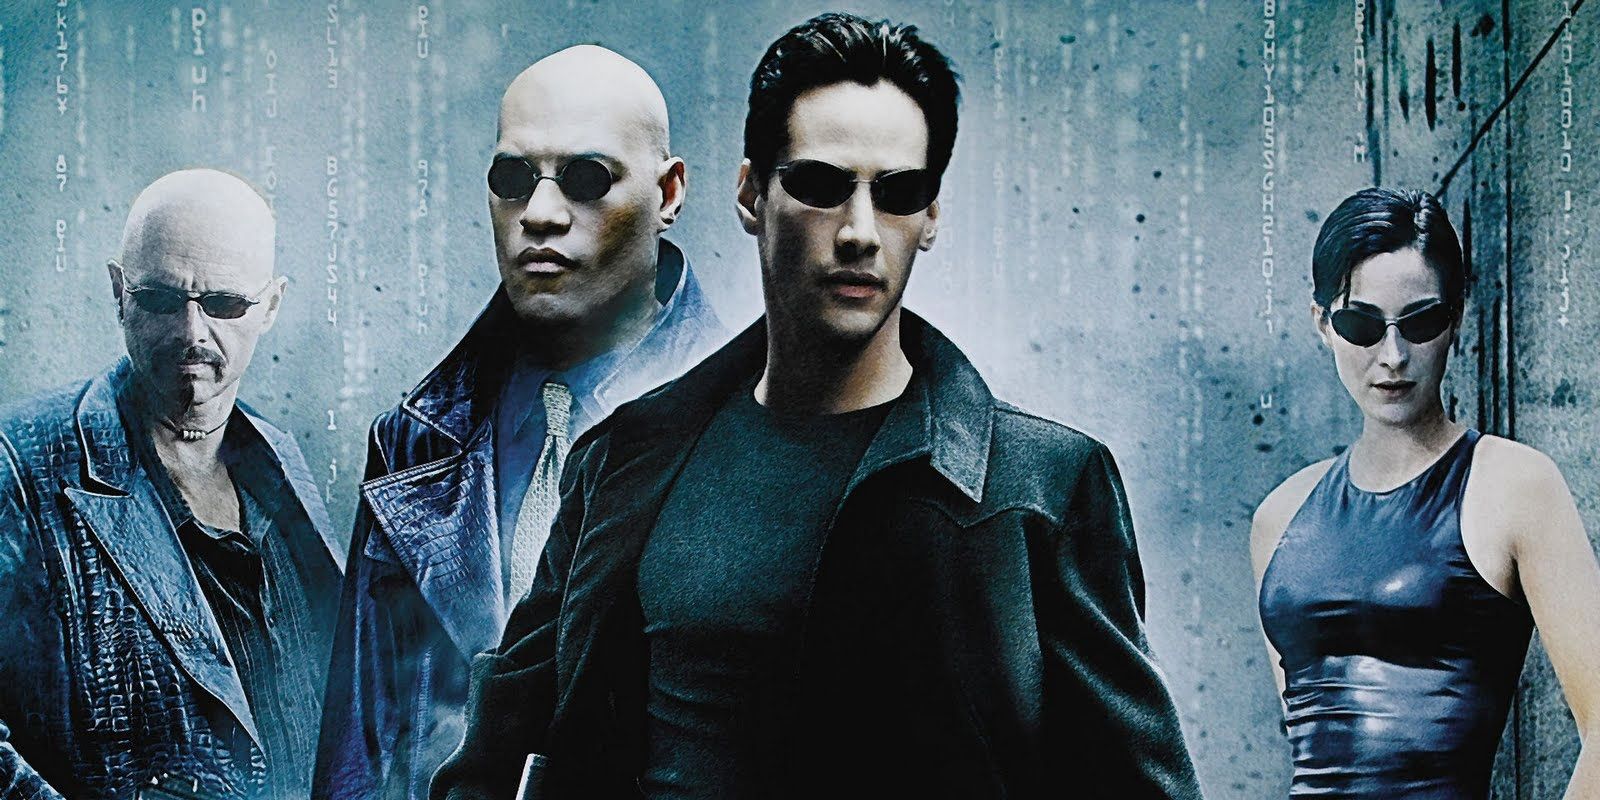 The Matrix poster featuring Neo, Trinity, Morpheus and Cypher